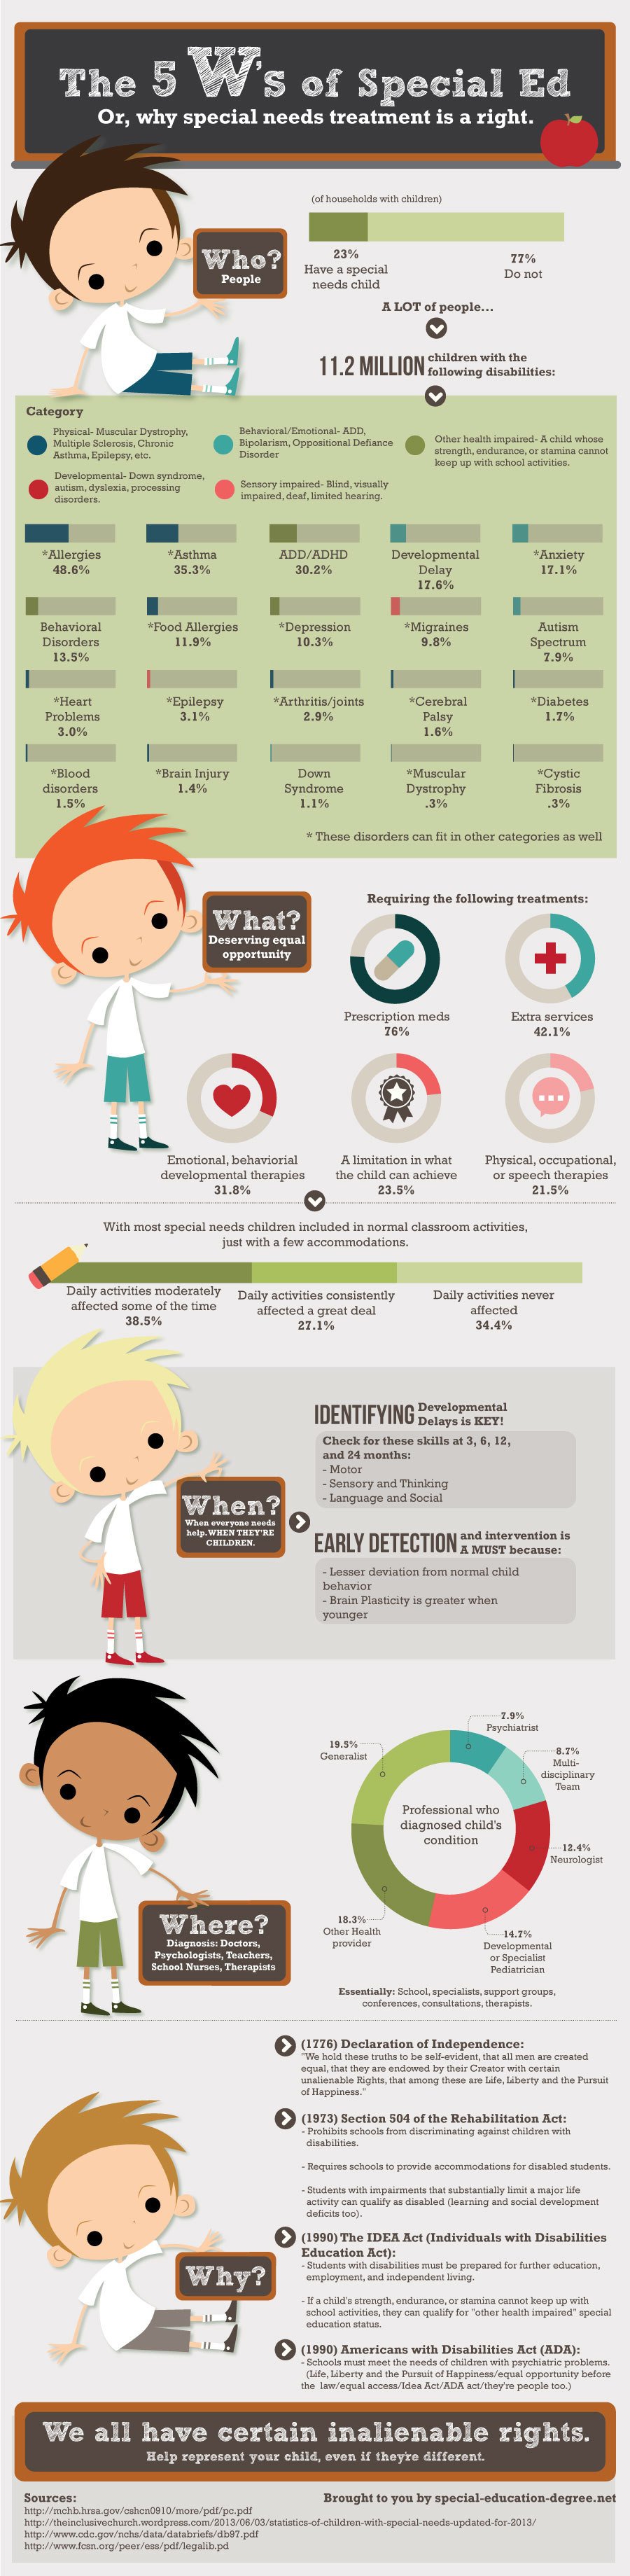 Special Ed 5Ws Infographic